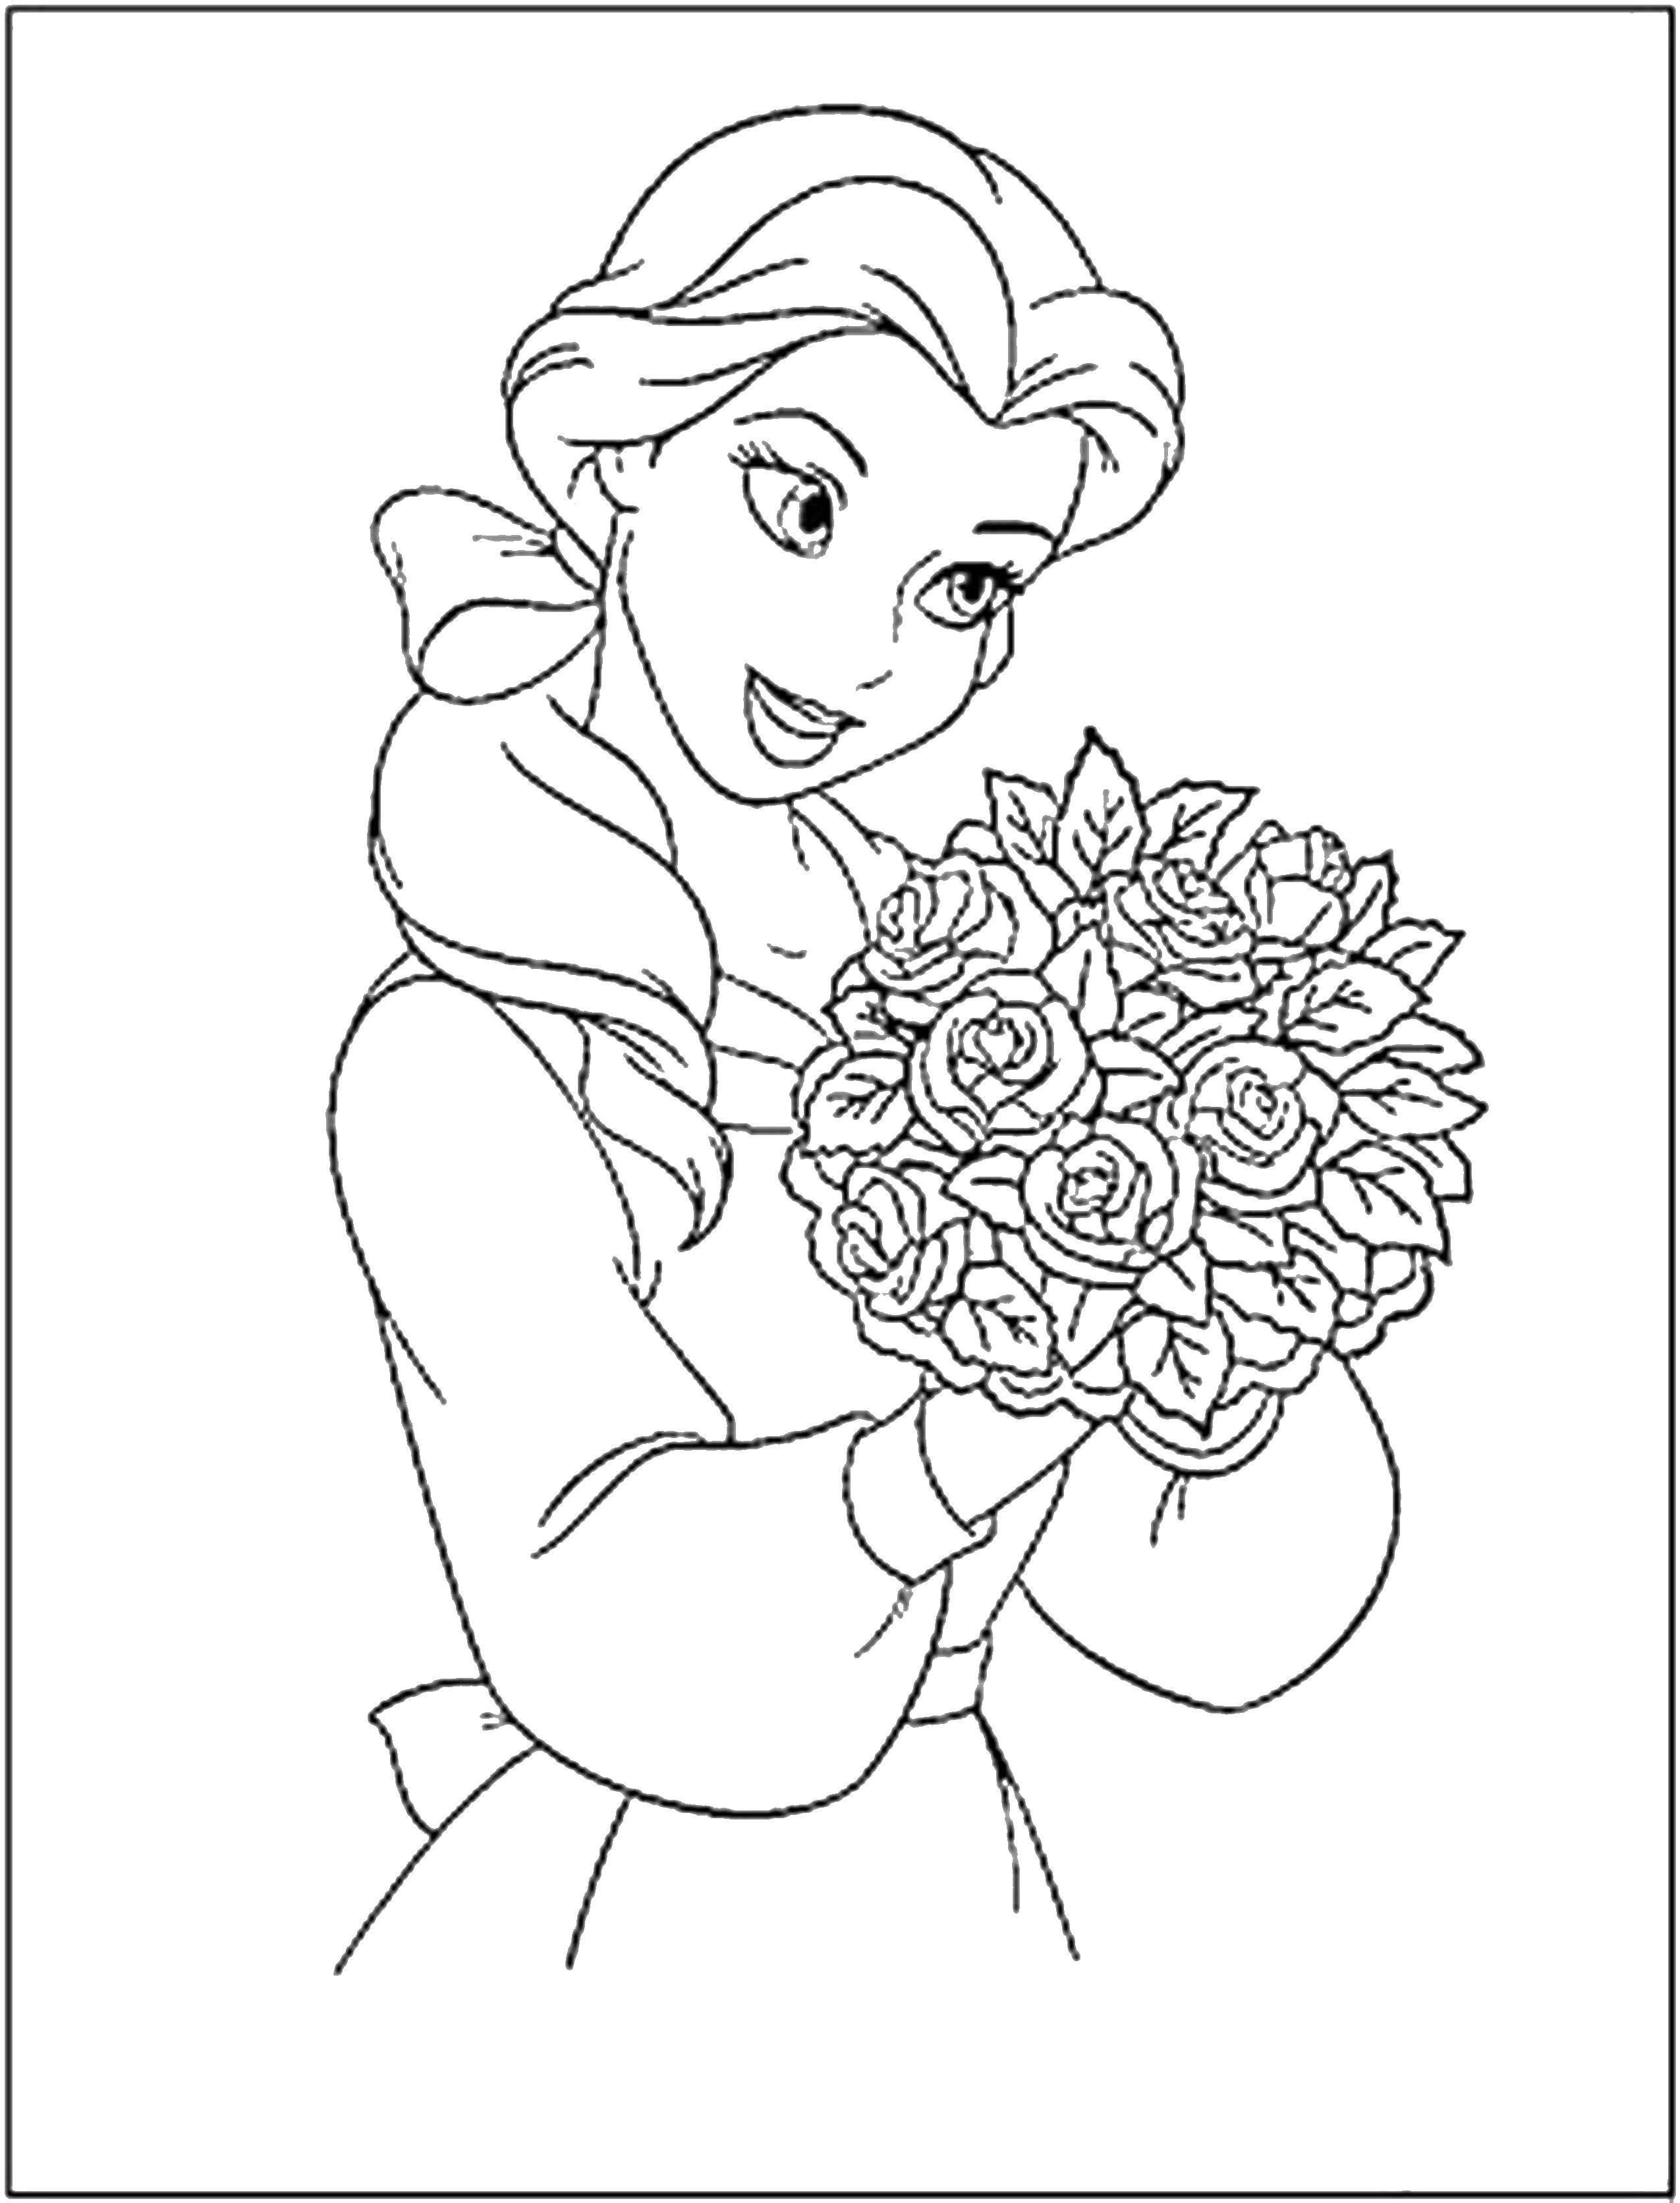 Coloring A beautiful Princess with a bouquet of roses. Category Princess. Tags:  princesses, flowers, roses.